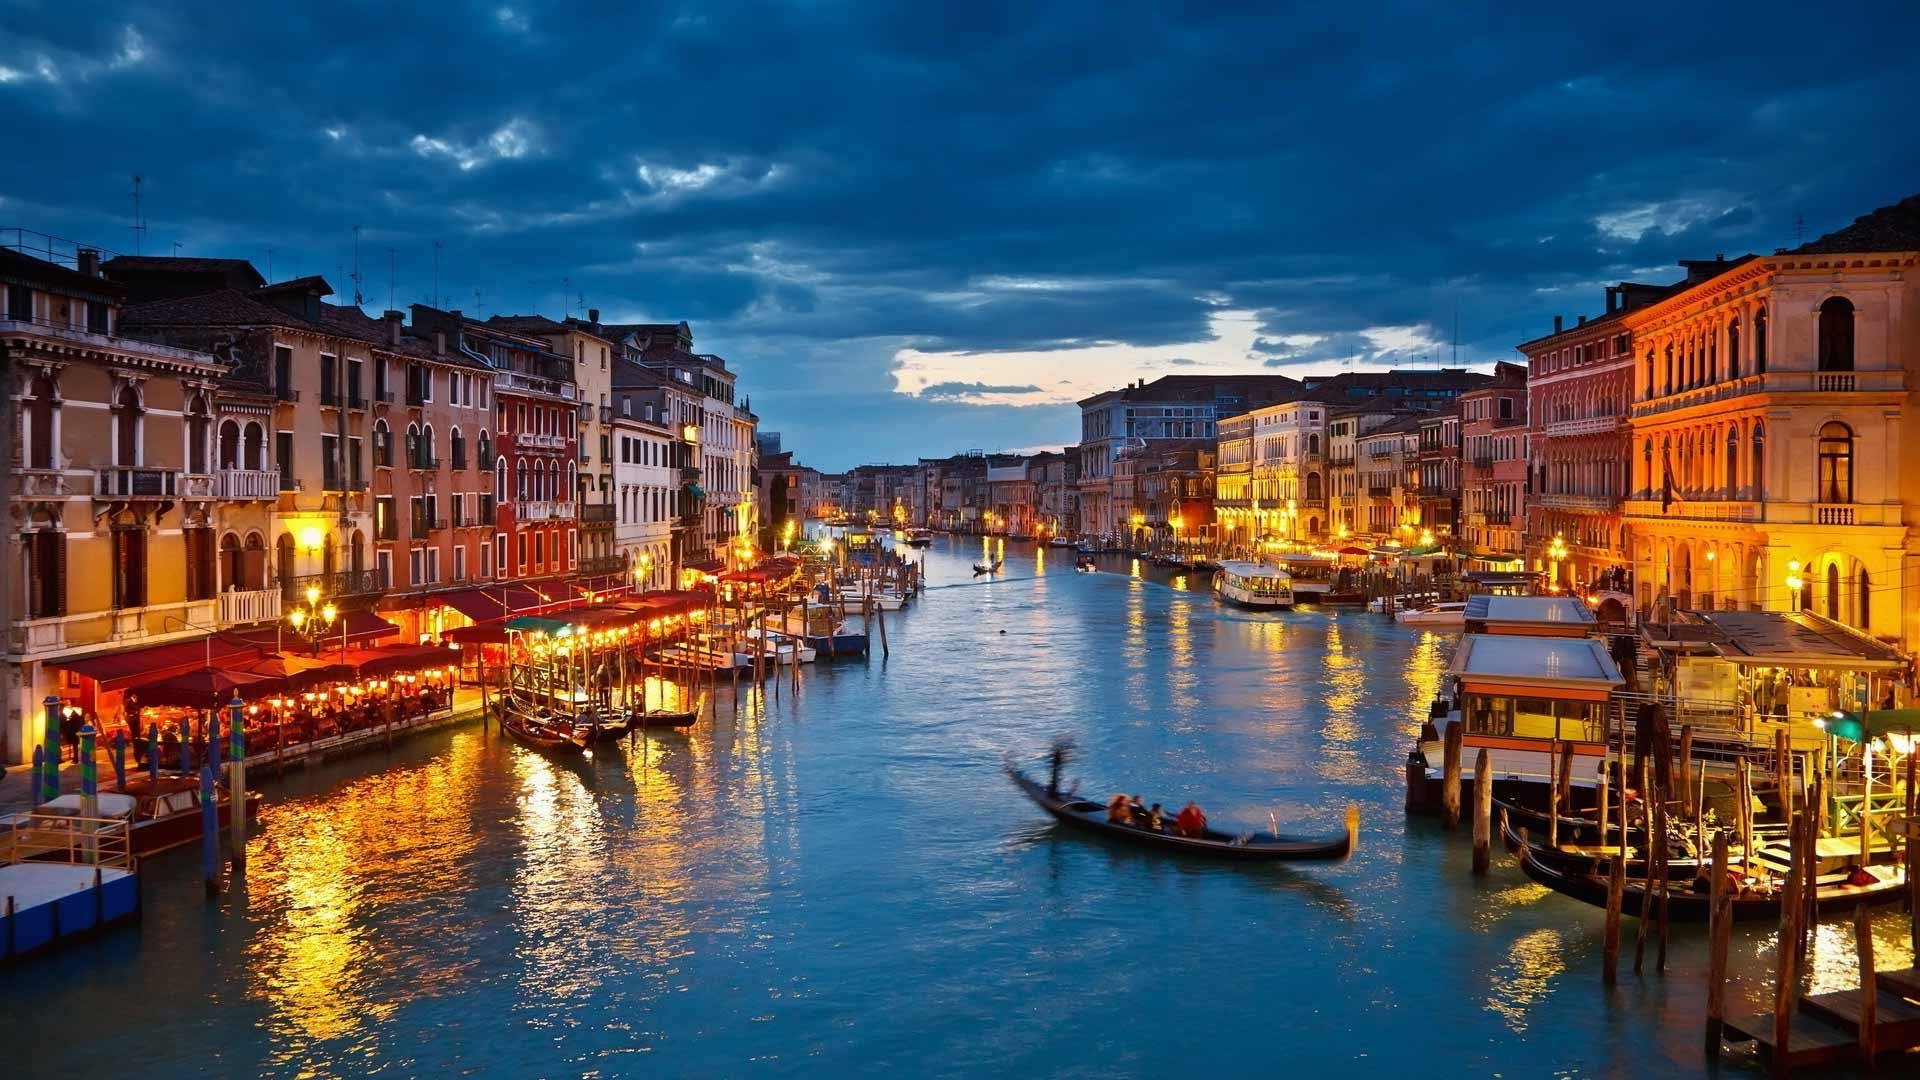 Europe's Famous City Venice Italy Picture